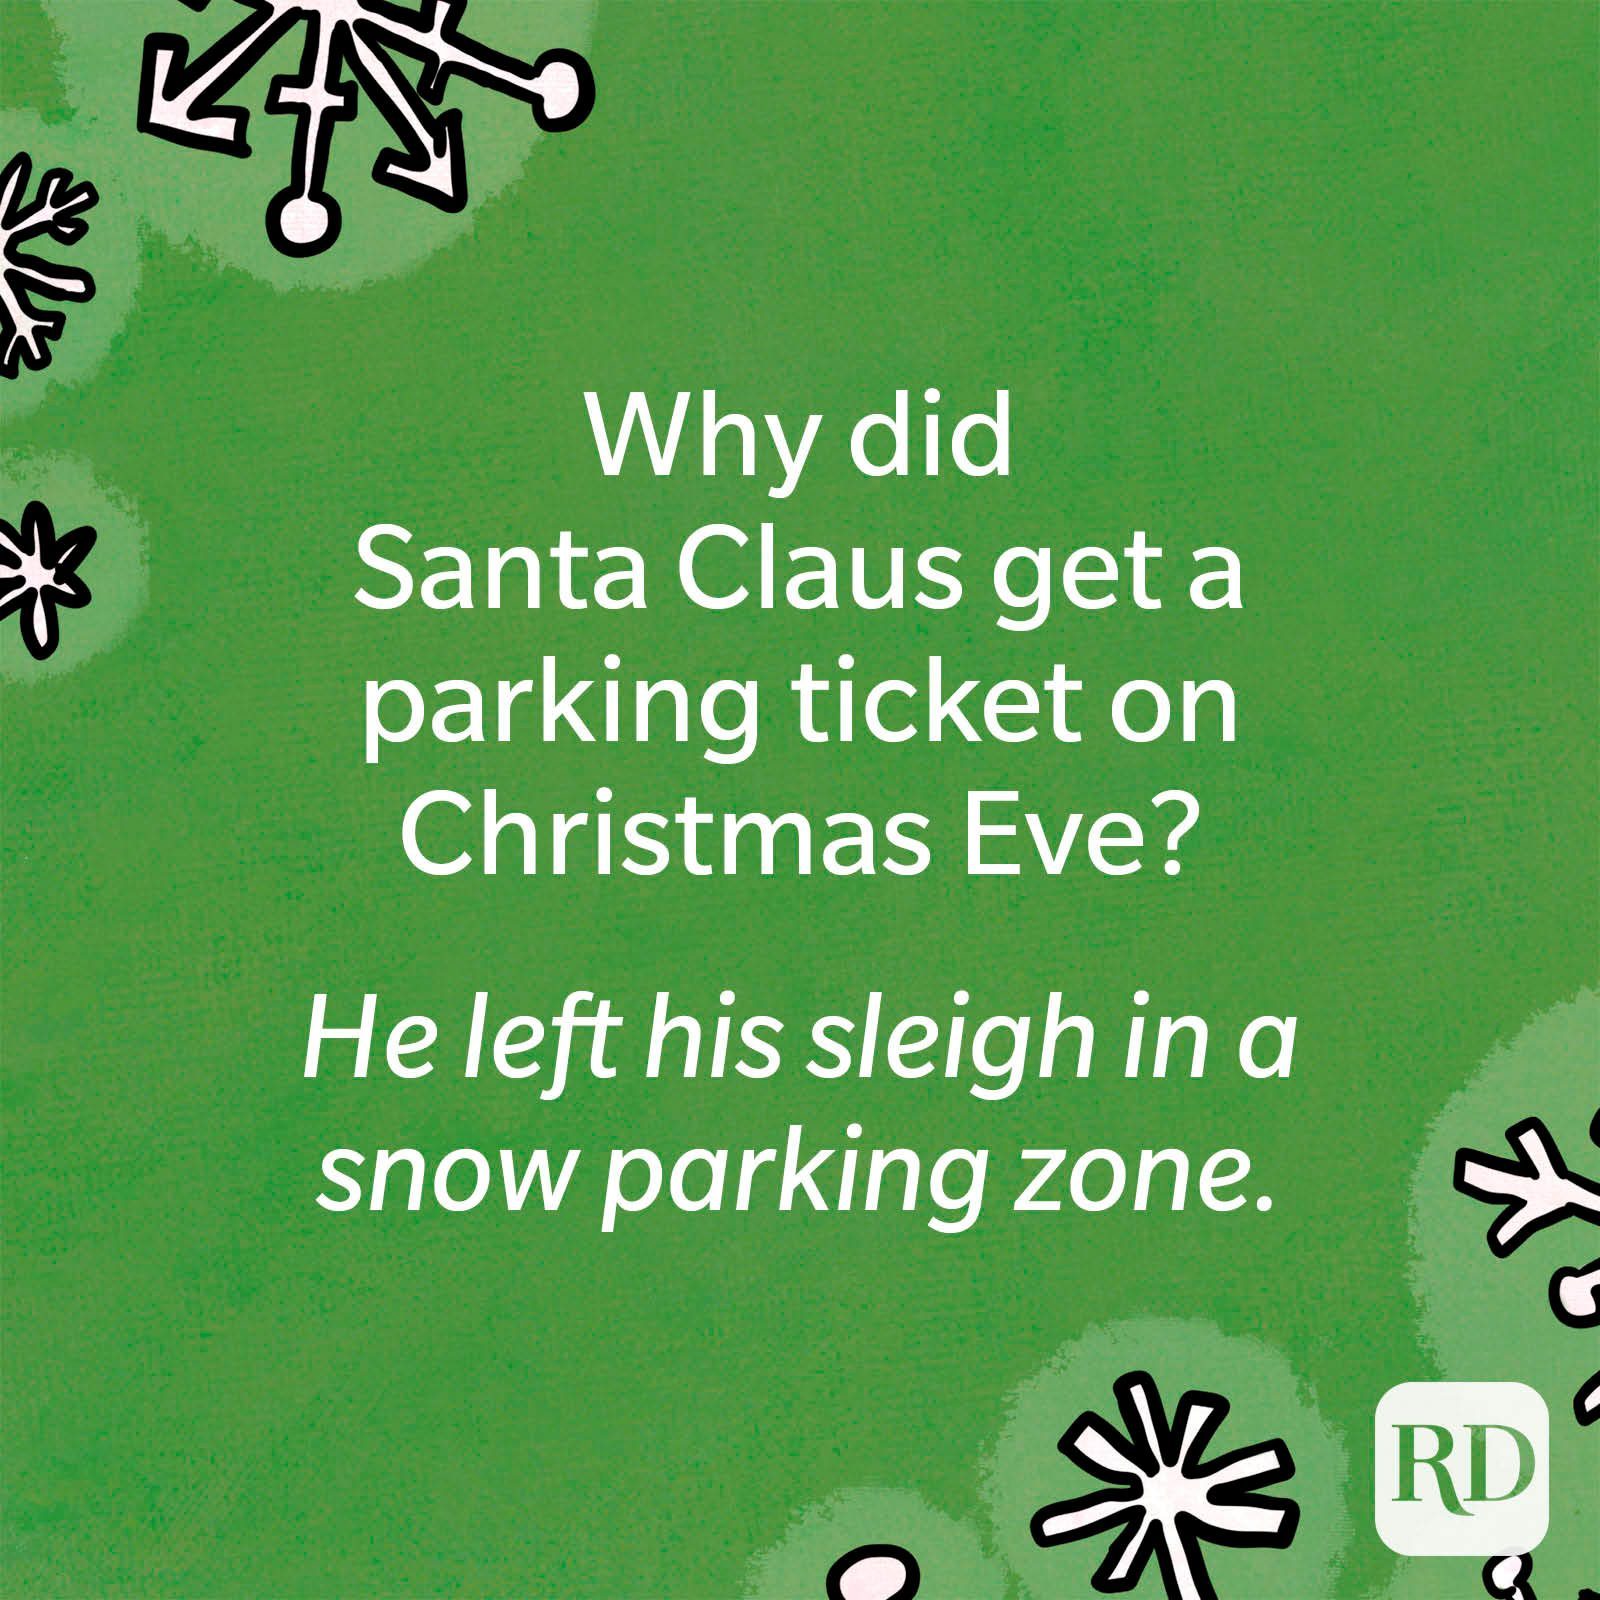 Why did Santa Claus get a parking ticket on Christmas Eve?